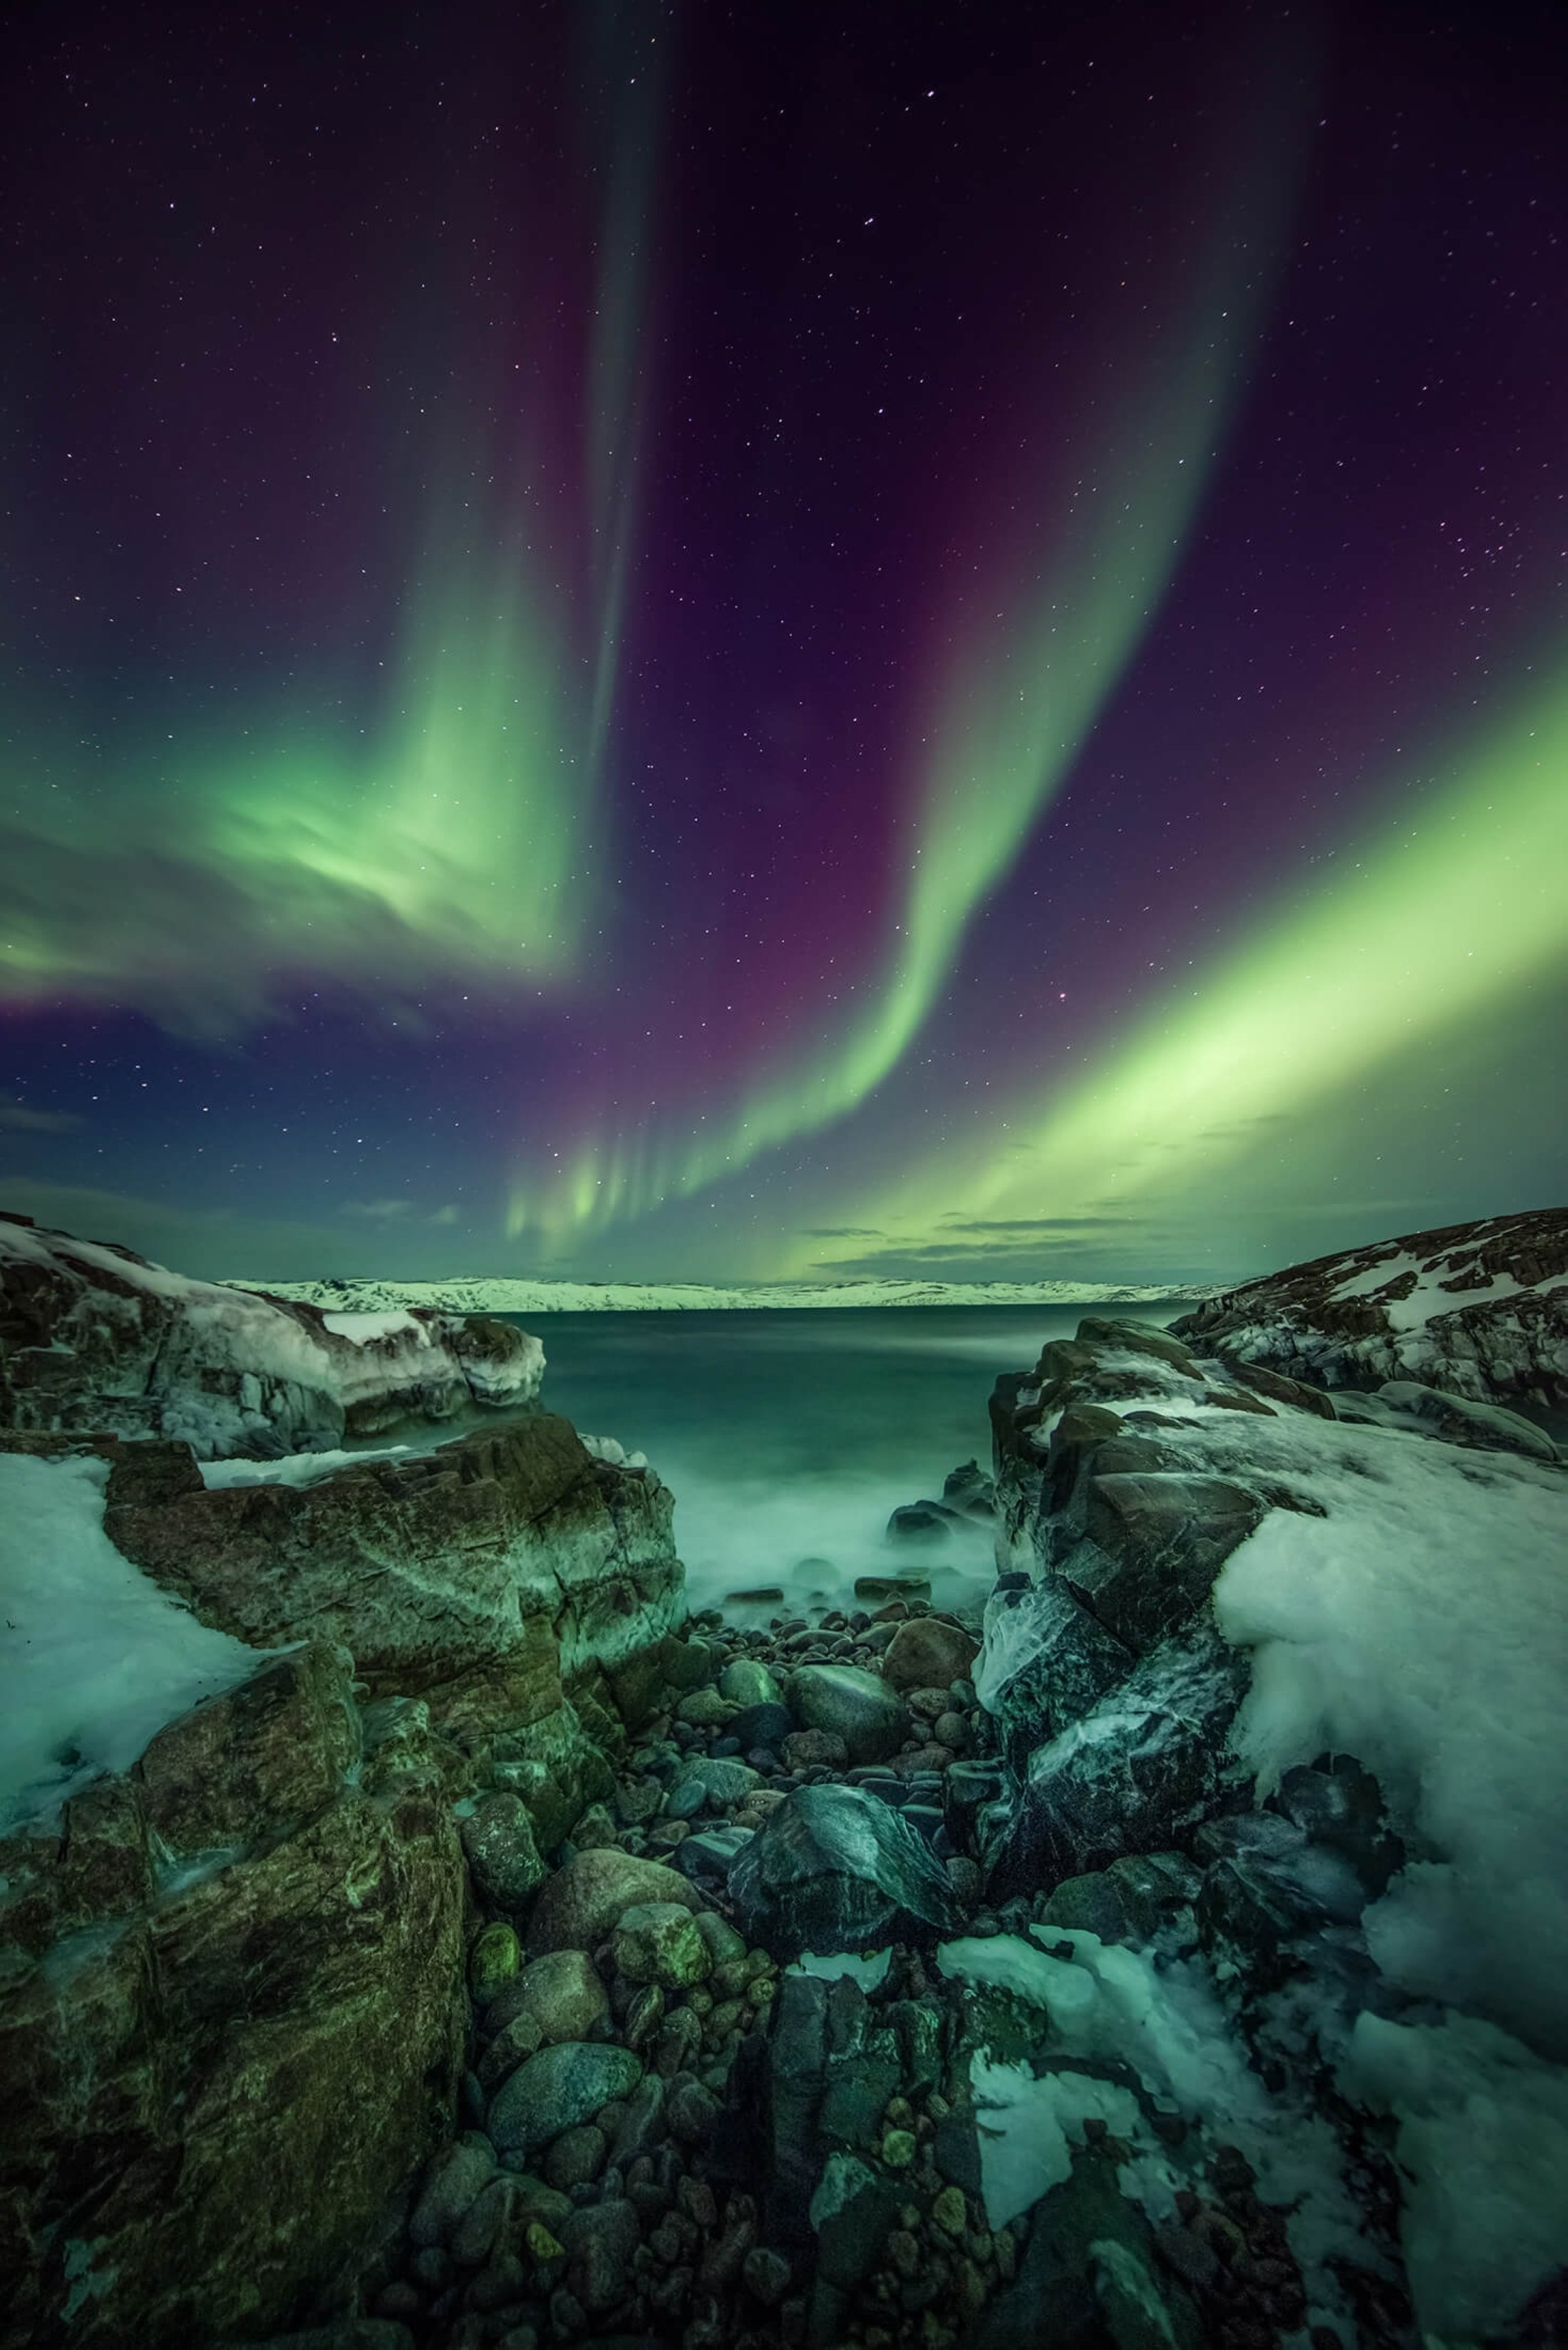 Out of this world Kola Peninsula painted by Northern Lights